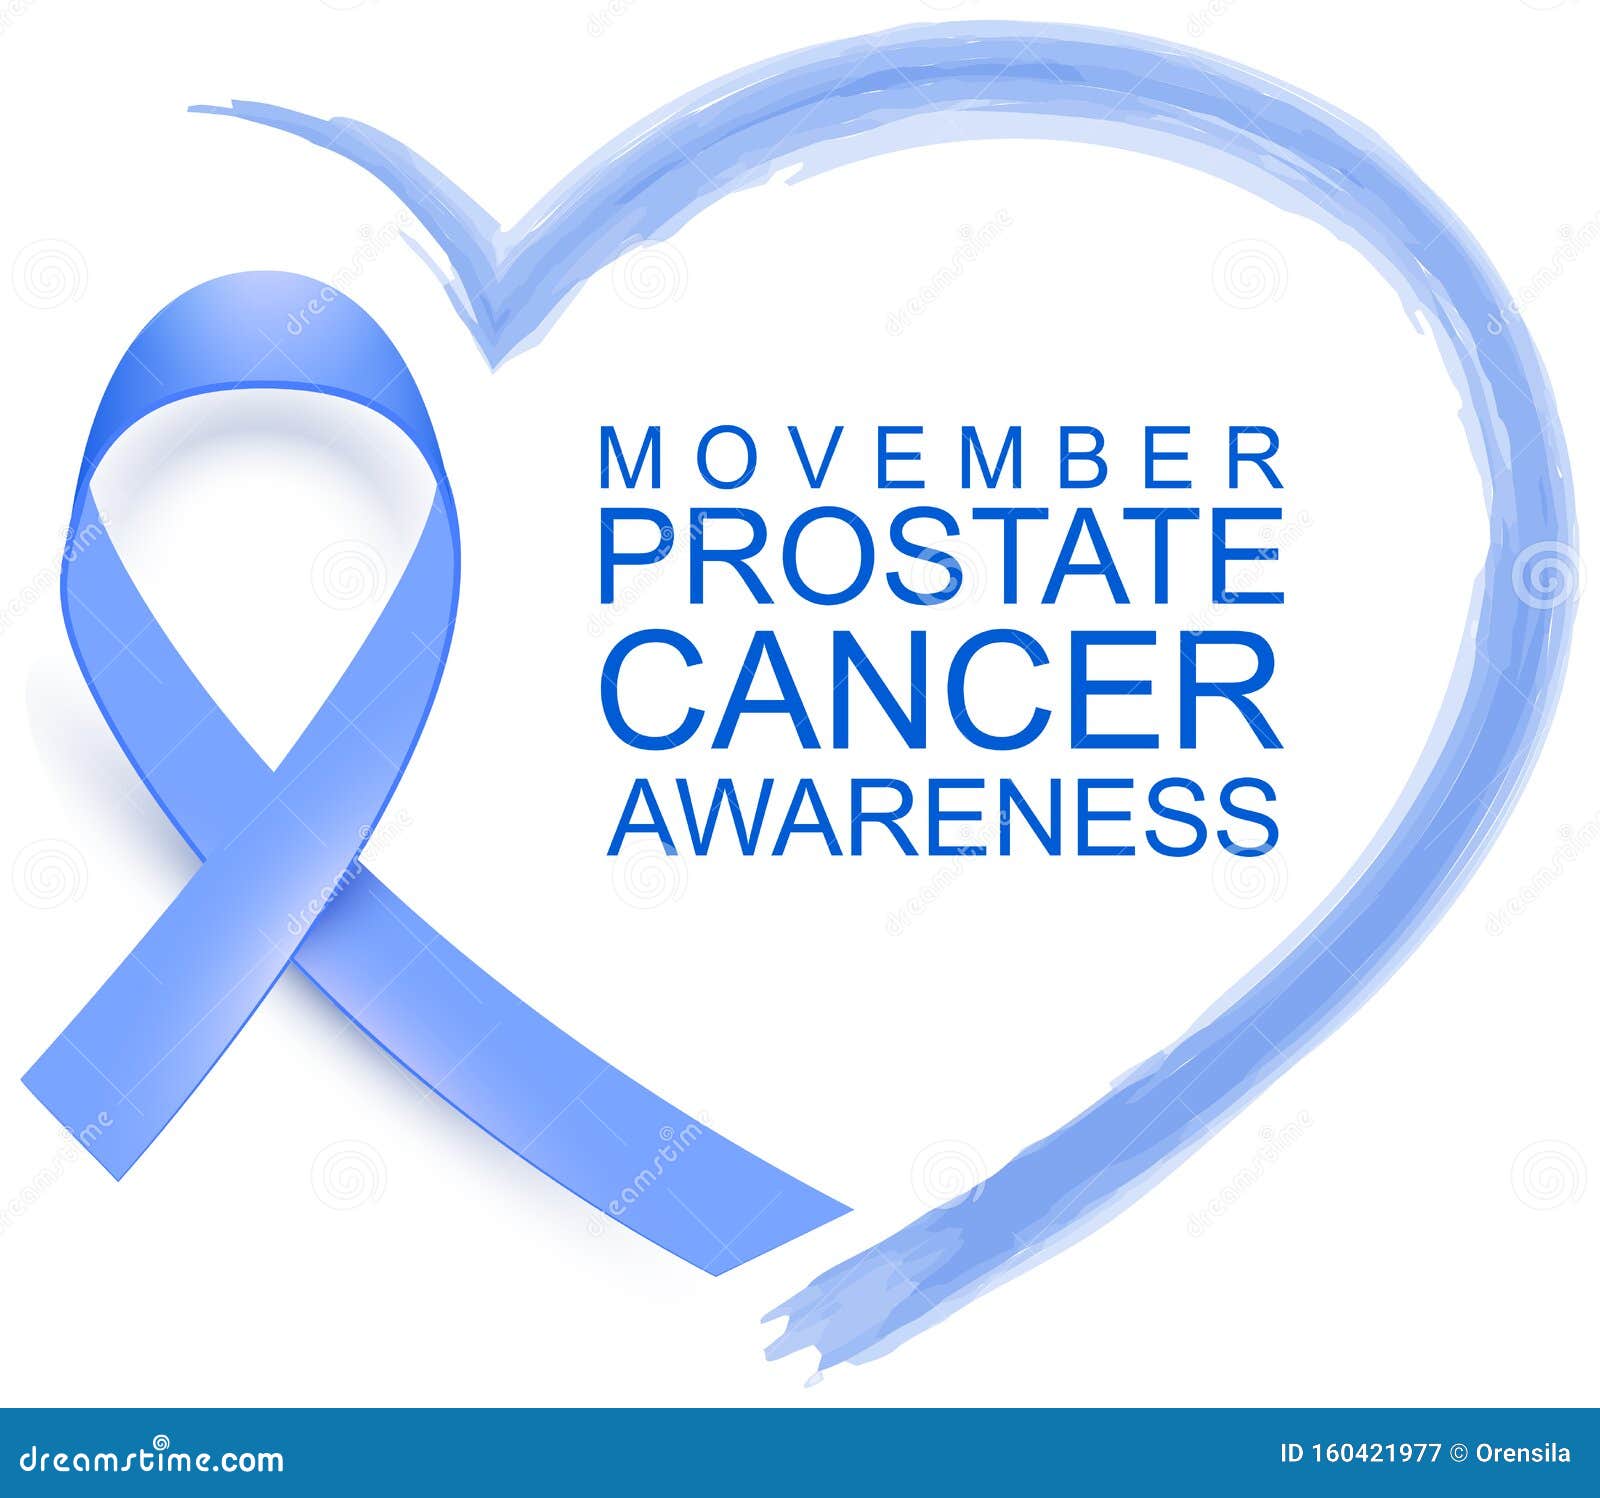 movember prostate cancer awareness blue ribbon and heart 